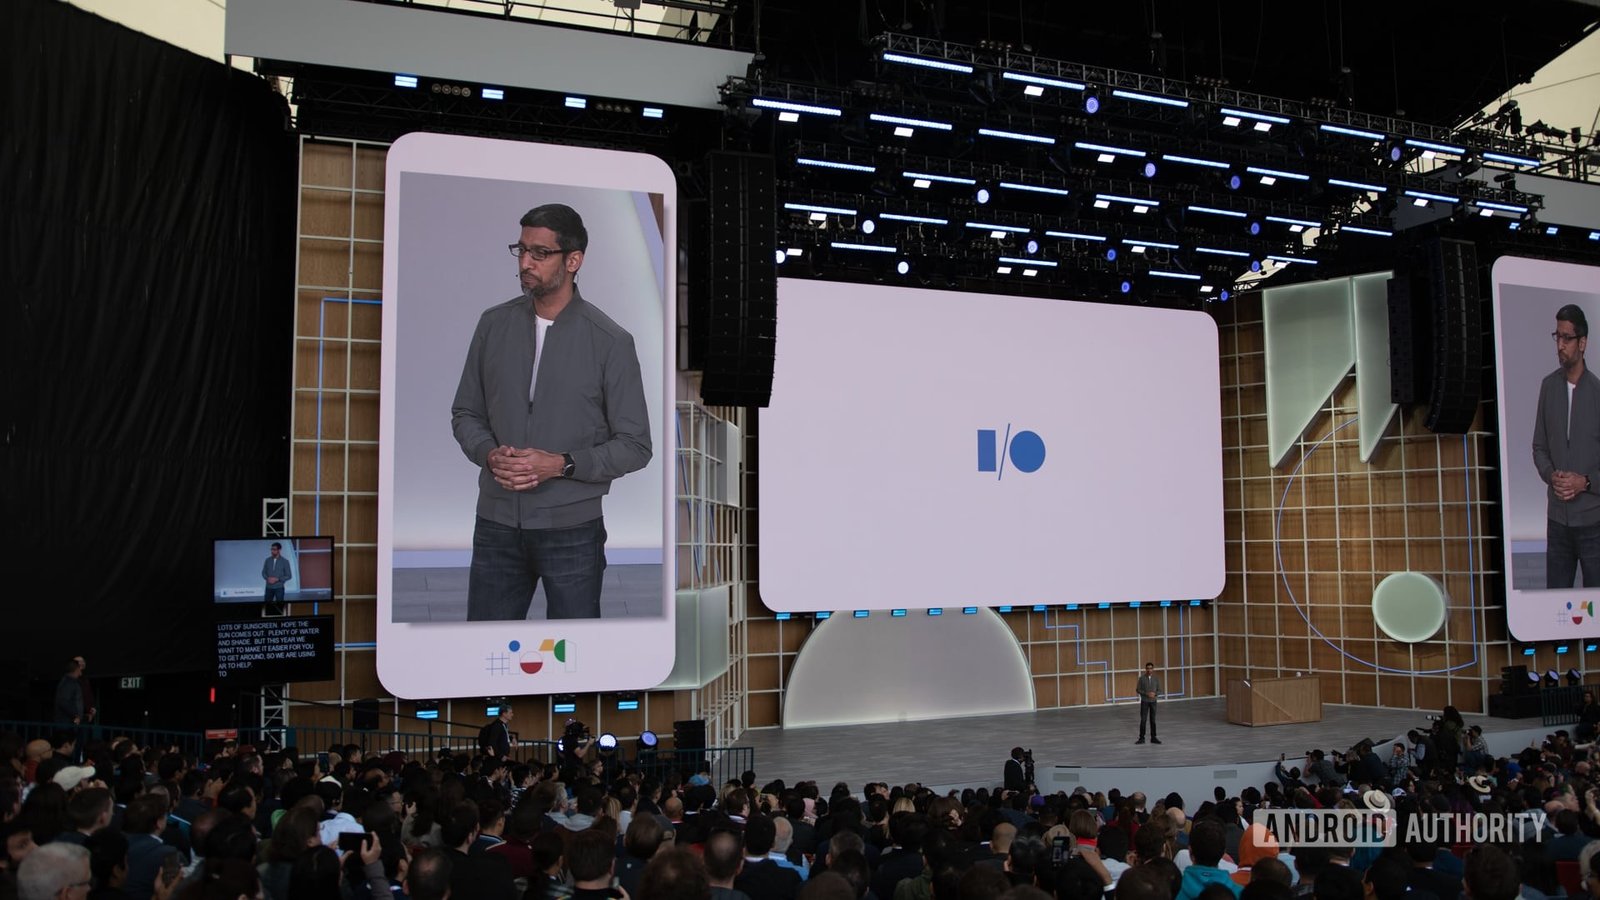 Updates to Wear OS, Google TV, and Android TV confirmed